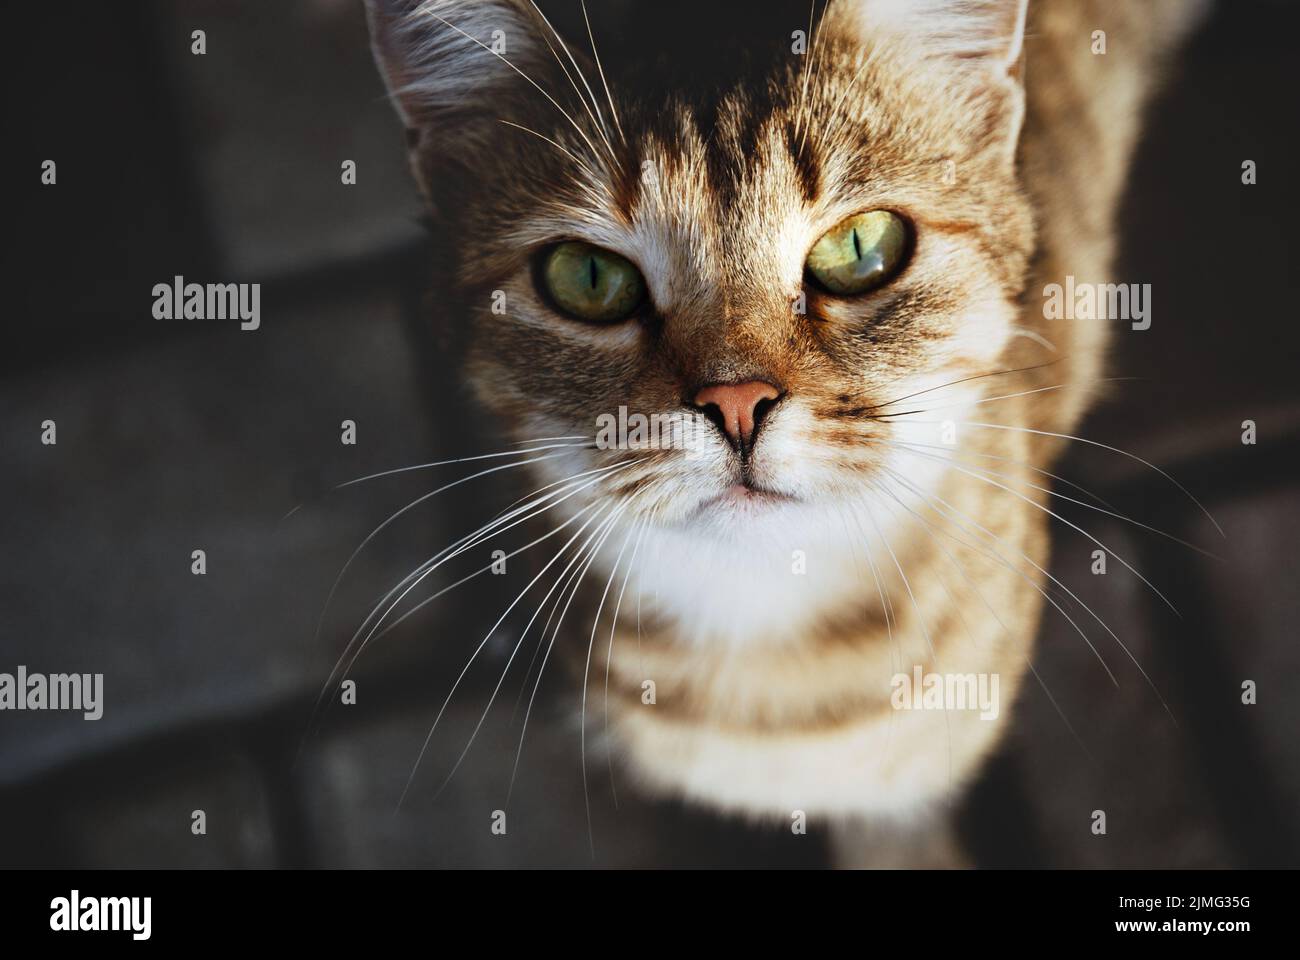 Homeless stray cat looking in your eyes, animal shelter, trust and care concept Stock Photo